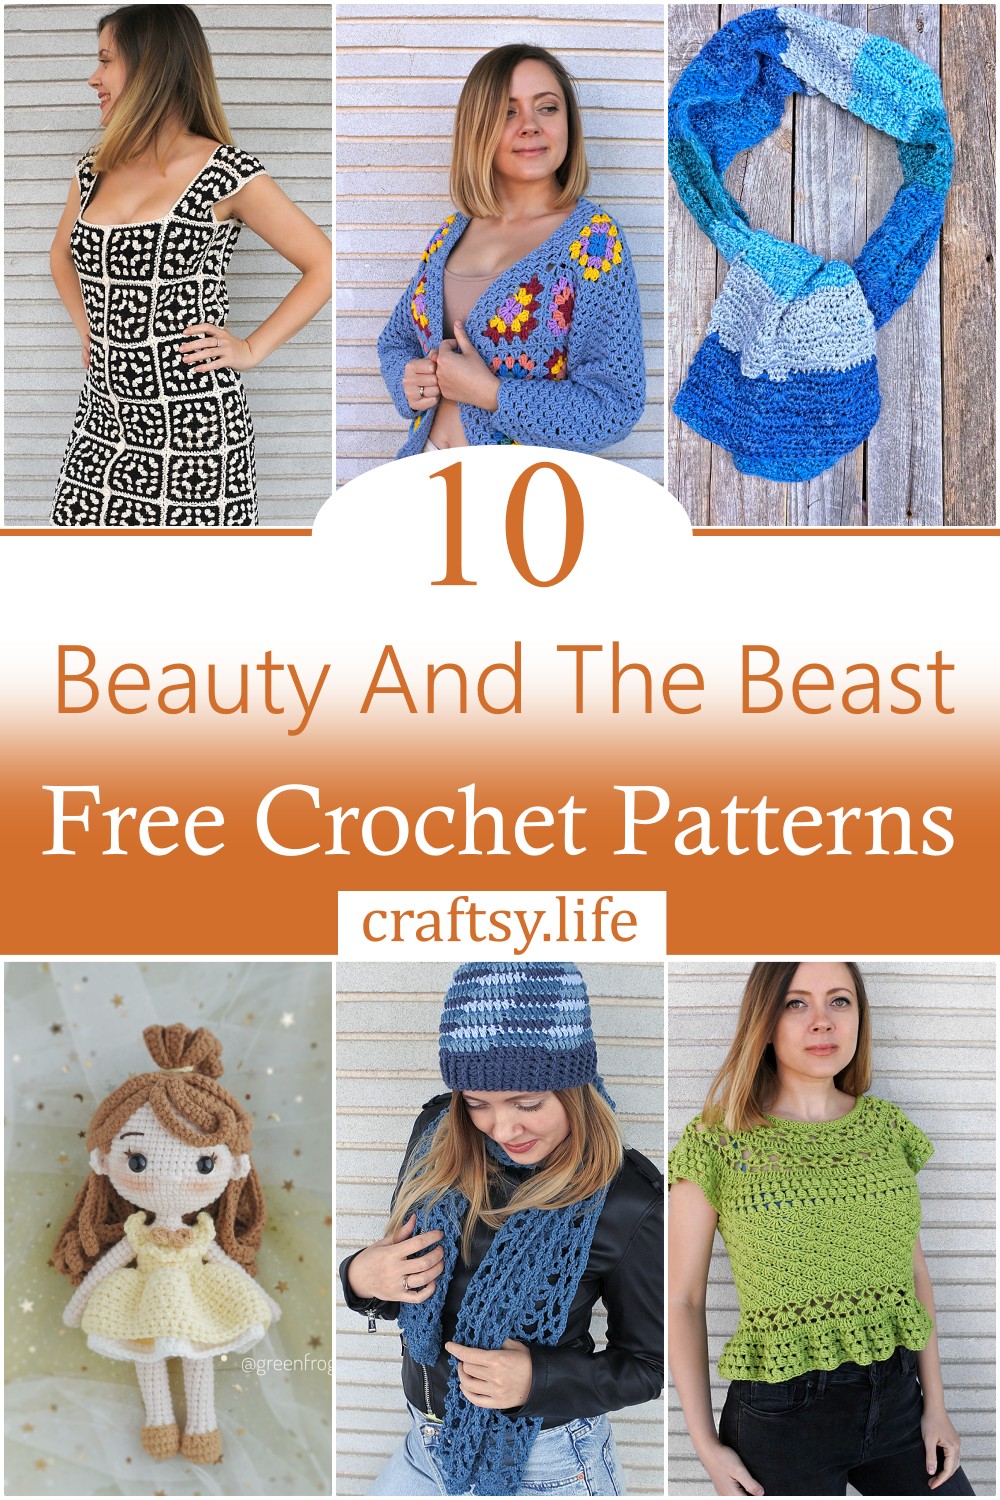 Beauty And The Beast Crochet Patterns 1